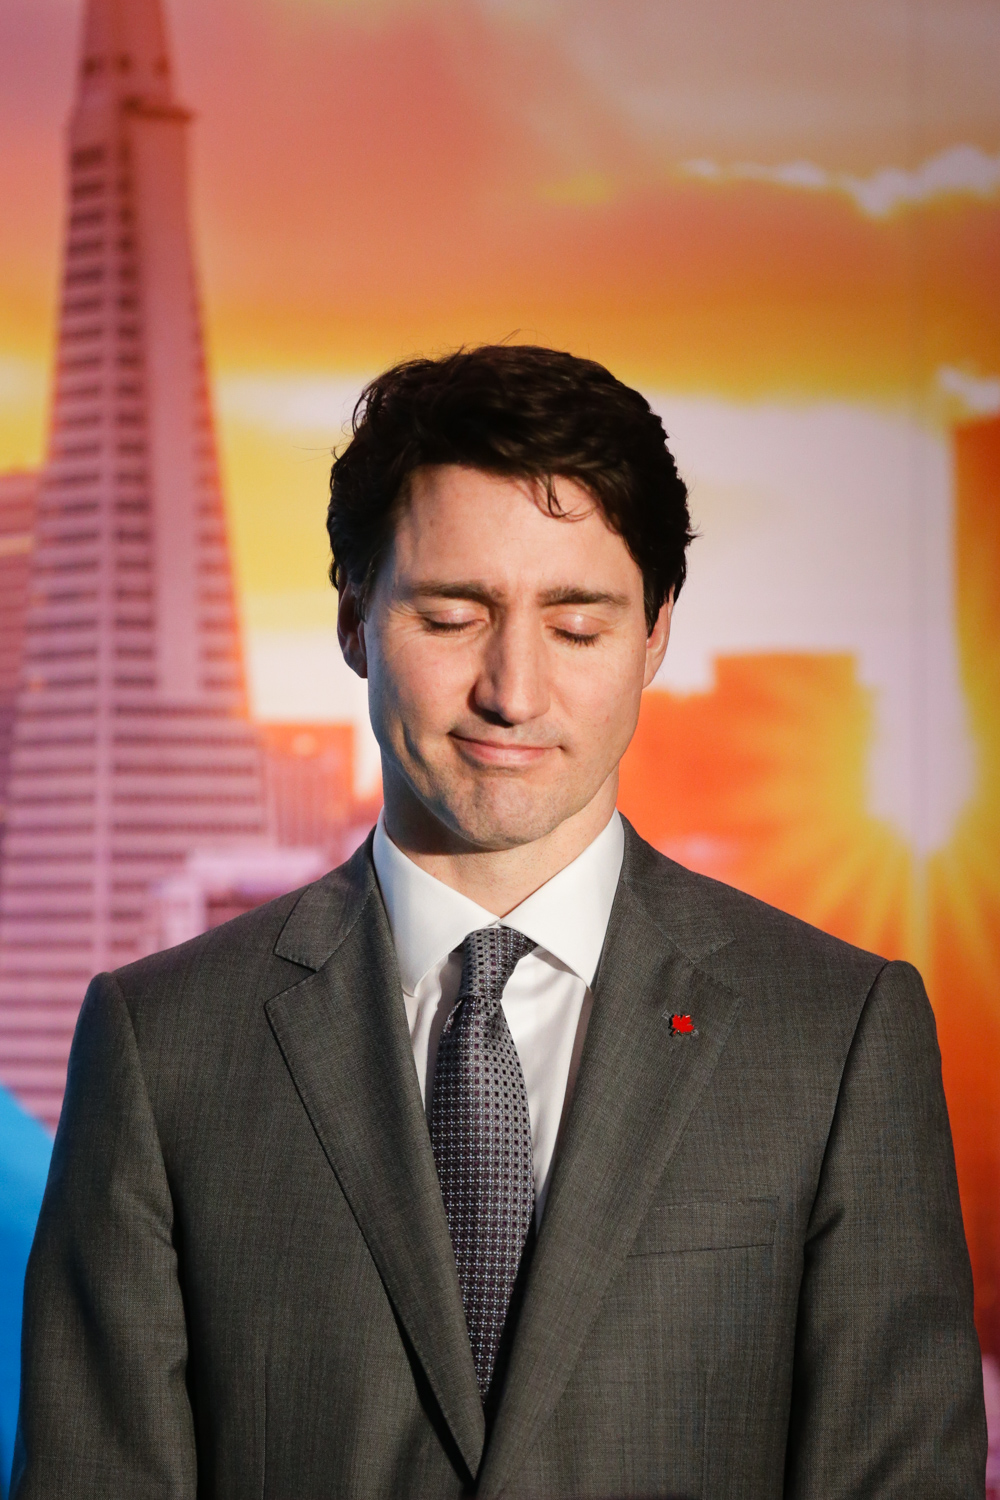  Justin Trudeau, Prime Minister of Canada, for AFP 